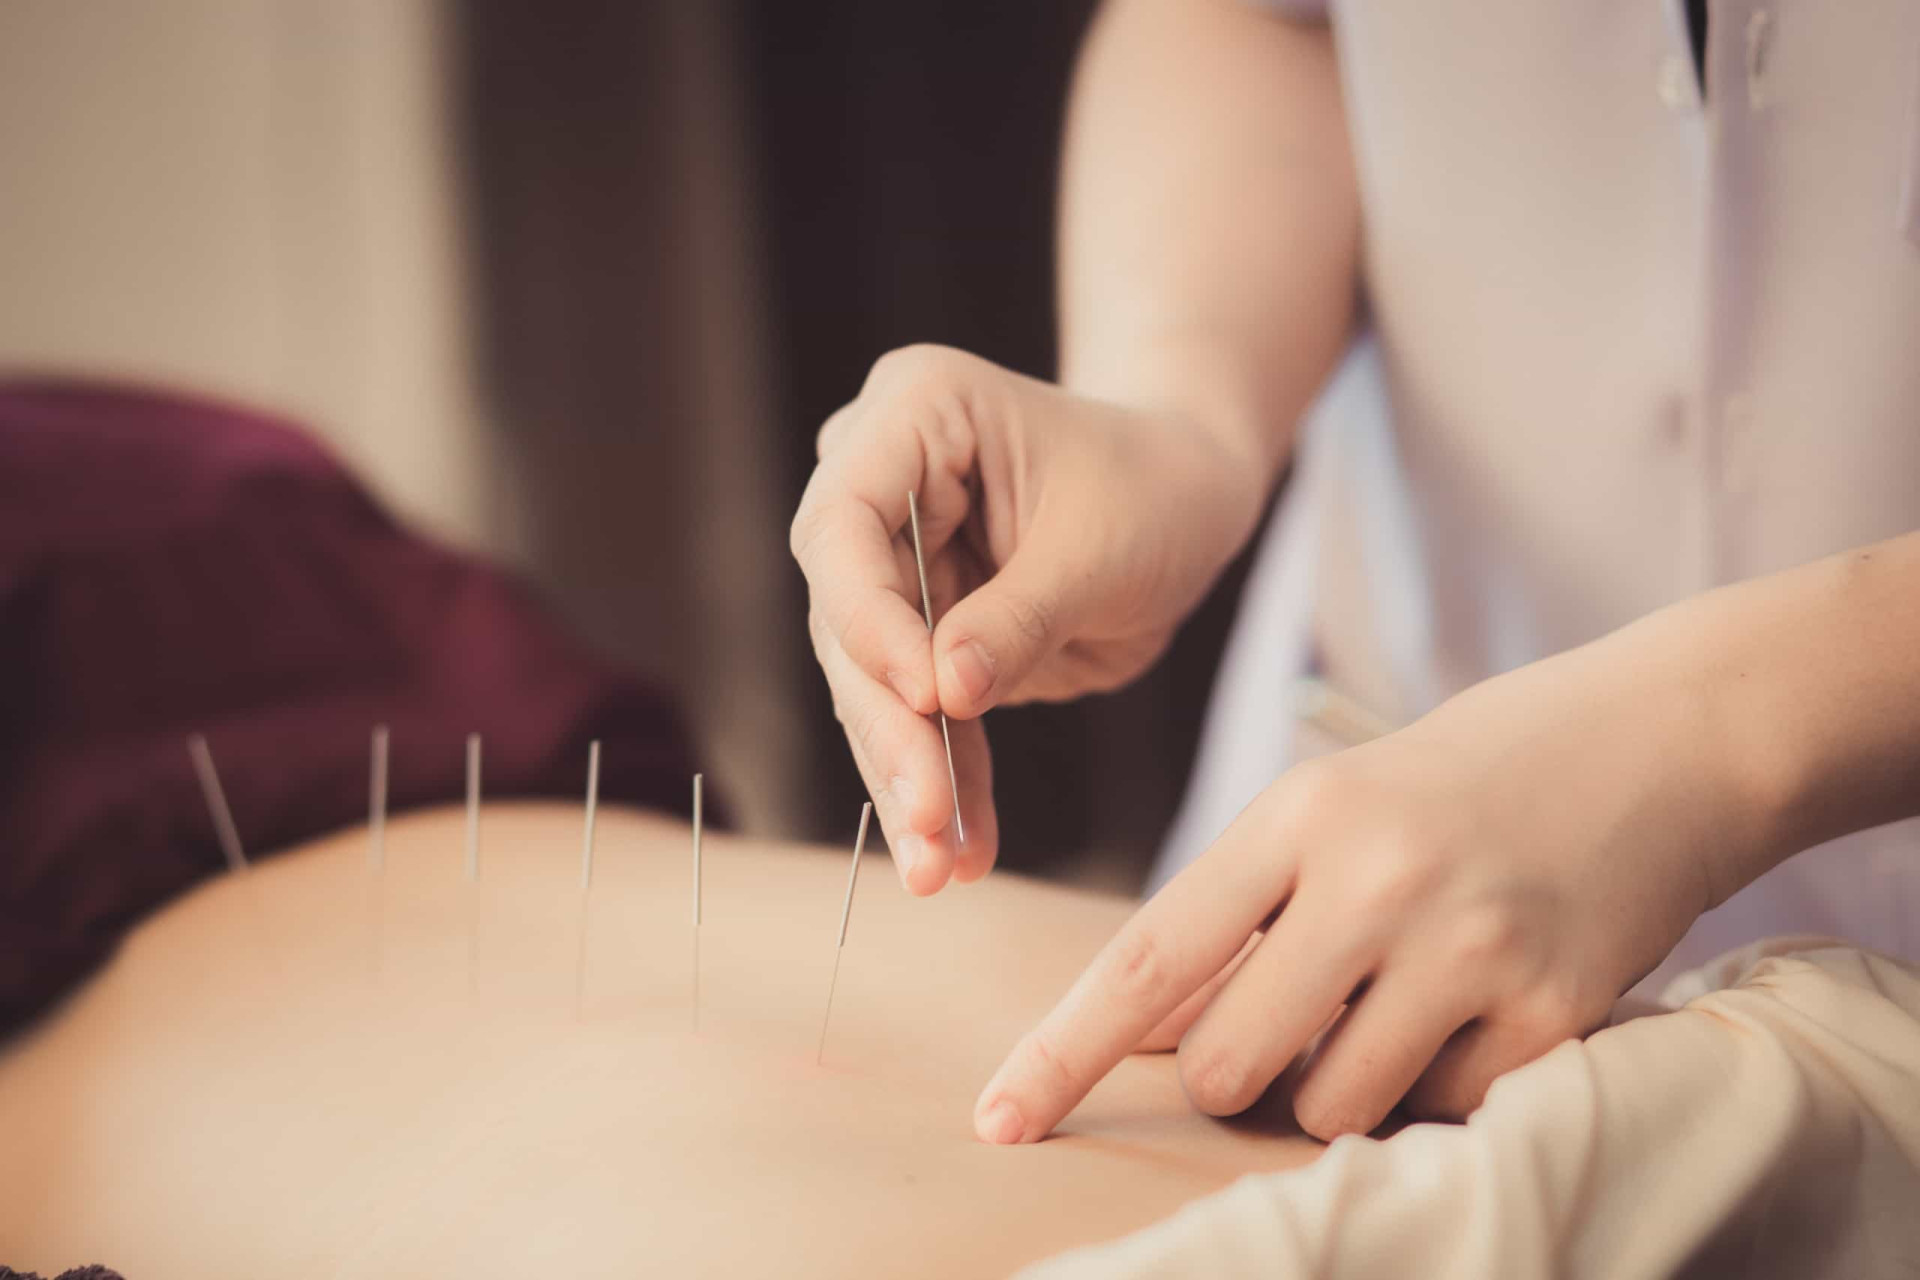 <p>Whether you have an ailment or feel well, acupuncture can help relieve pain or assist you in maintaining wellness. It also boosts immunity and helps you manage stress. However, if you have a bleeding disorder (like hemophilia), use blood thinners, or have any skin disease, then it should be avoided. If pregnant, then needling the abdominal area isn't advised.</p><p><a href="https://www.msn.com/en-us/community/channel/vid-7xx8mnucu55yw63we9va2gwr7uihbxwc68fxqp25x6tg4ftibpra?cvid=94631541bc0f4f89bfd59158d696ad7e">Follow us and access great exclusive content every day</a></p>